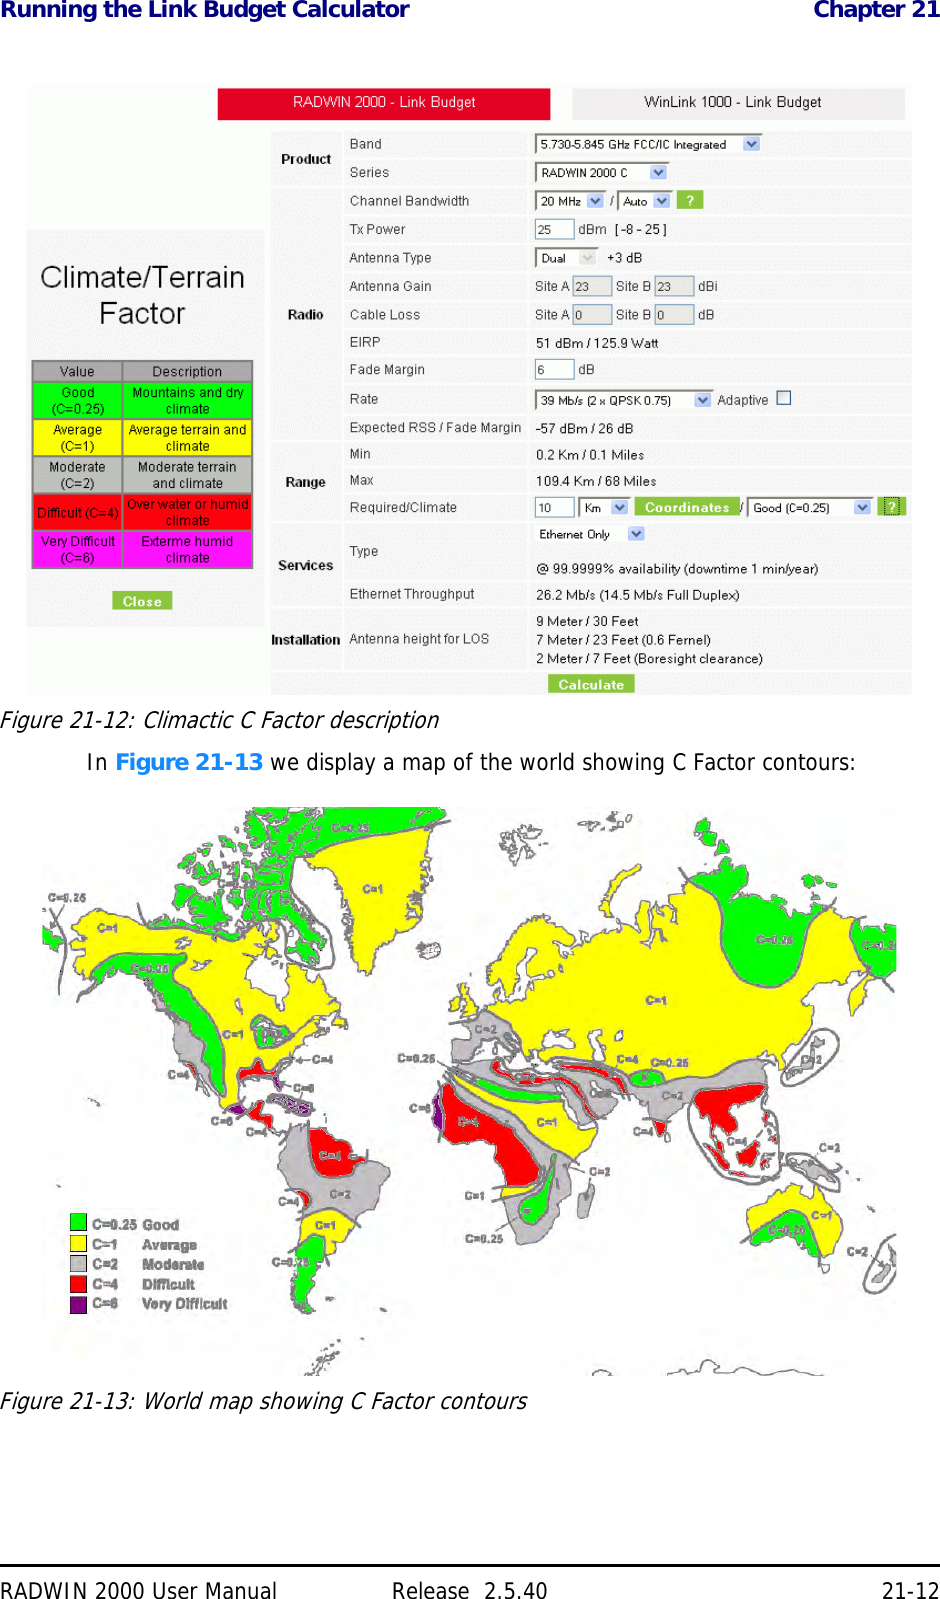 Running the Link Budget Calculator Chapter 21RADWIN 2000 User Manual Release  2.5.40 21-12Figure 21-12: Climactic C Factor descriptionIn Figure 21-13 we display a map of the world showing C Factor contours:Figure 21-13: World map showing C Factor contours